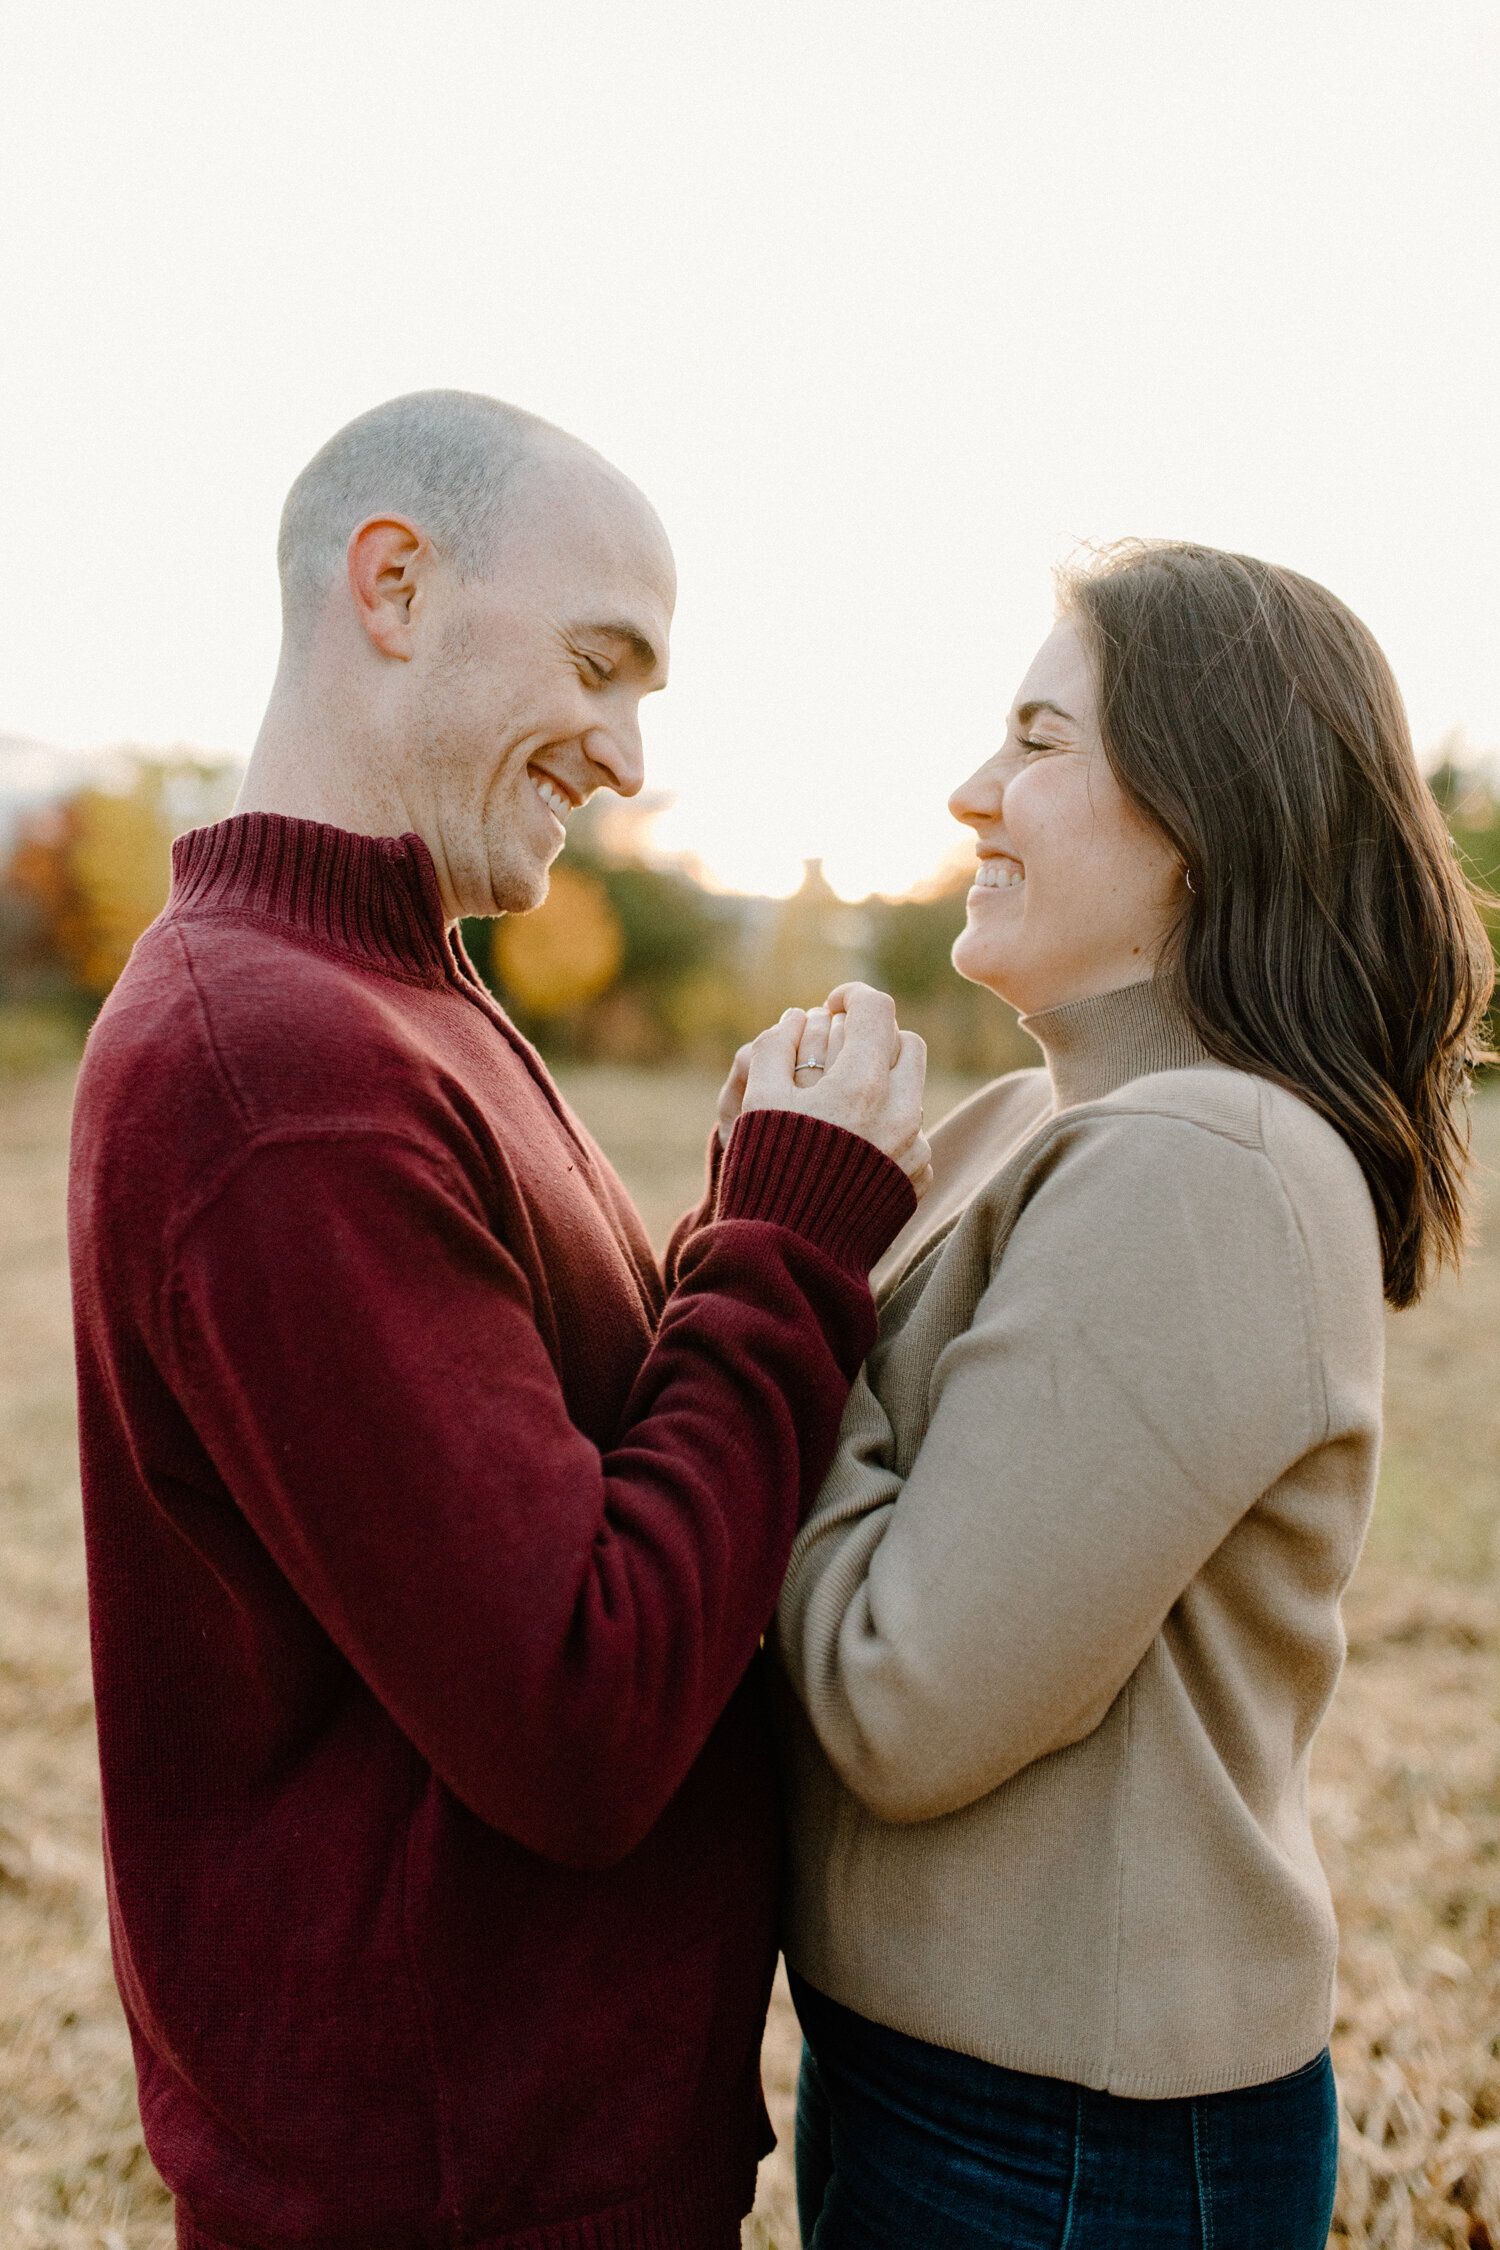  Laughing playfully, Ontario, Canada’s Chelsea Mason Photography captures this couple holding hands and smiling during their autumn engagement session. womens mock neck turtle neck sweater mens red pullover ontario canada engagement photographer bare